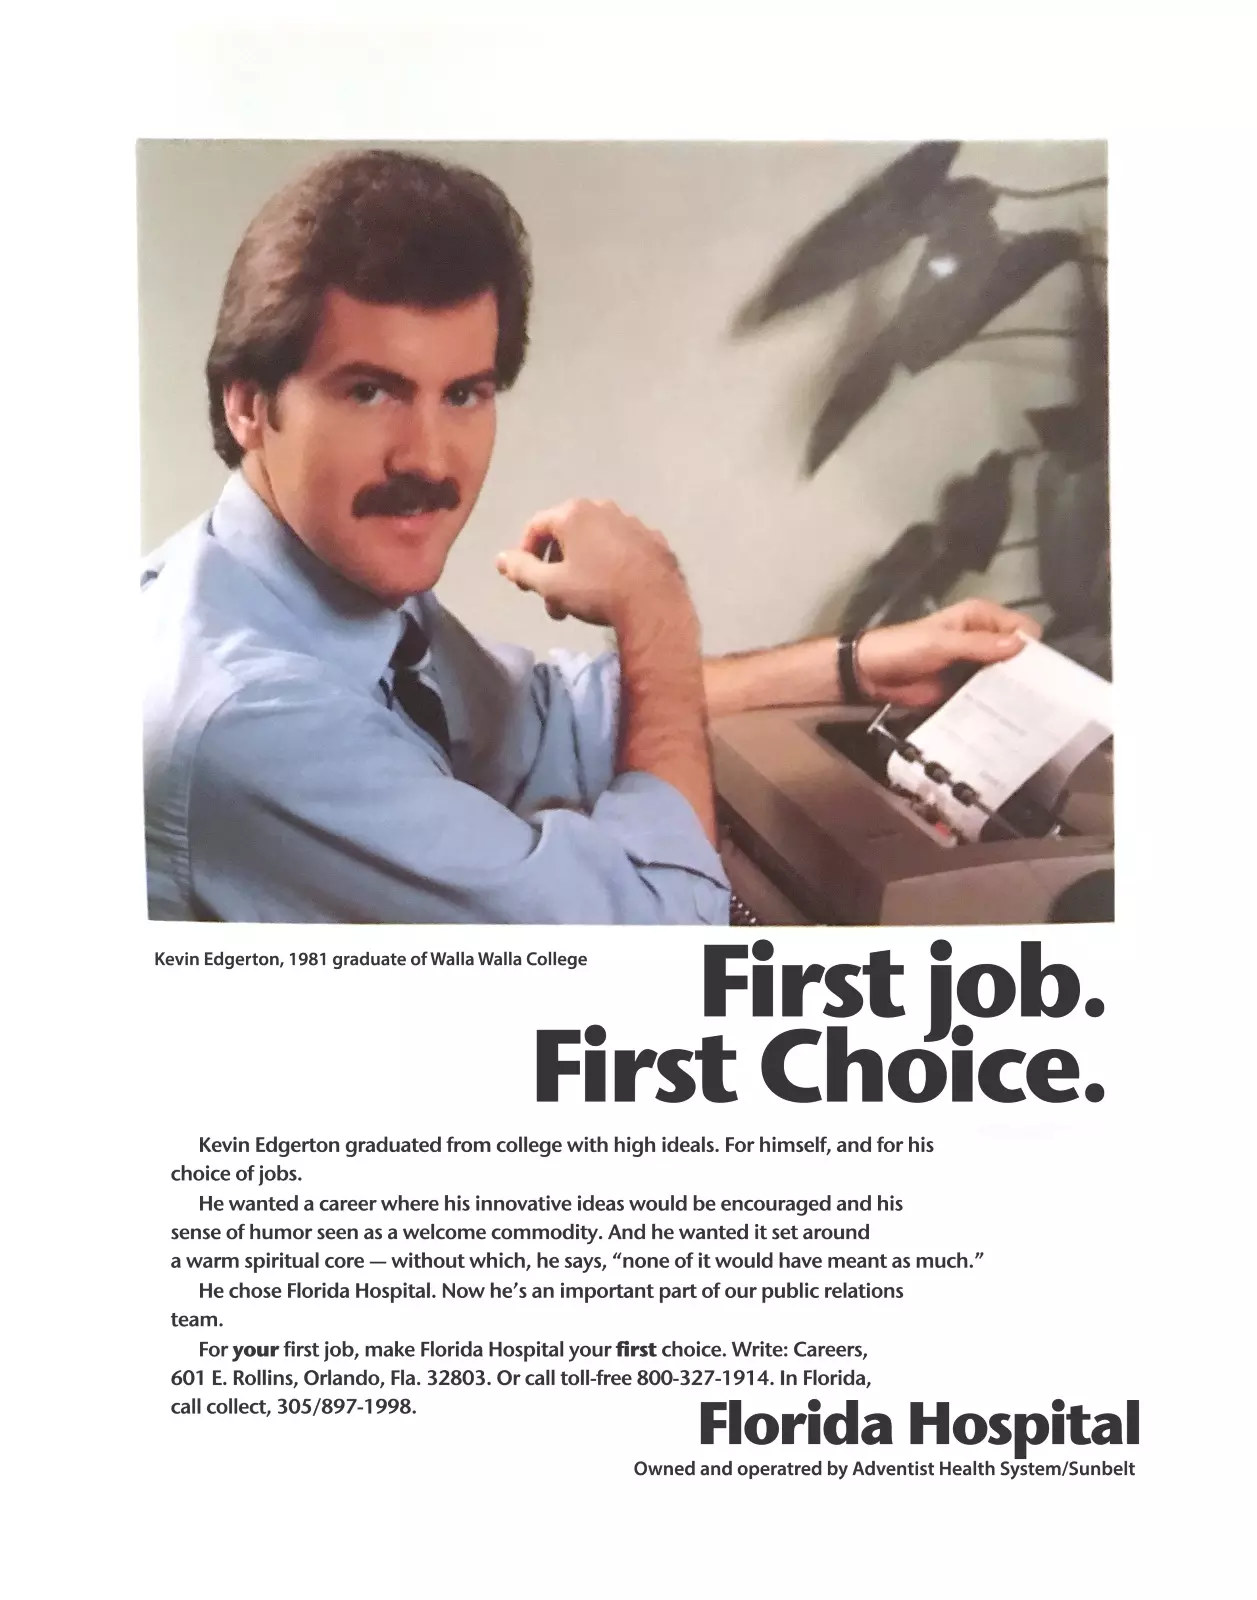 Florida Hospital recruitment ad from 1980s featuring Kevin Edgerton